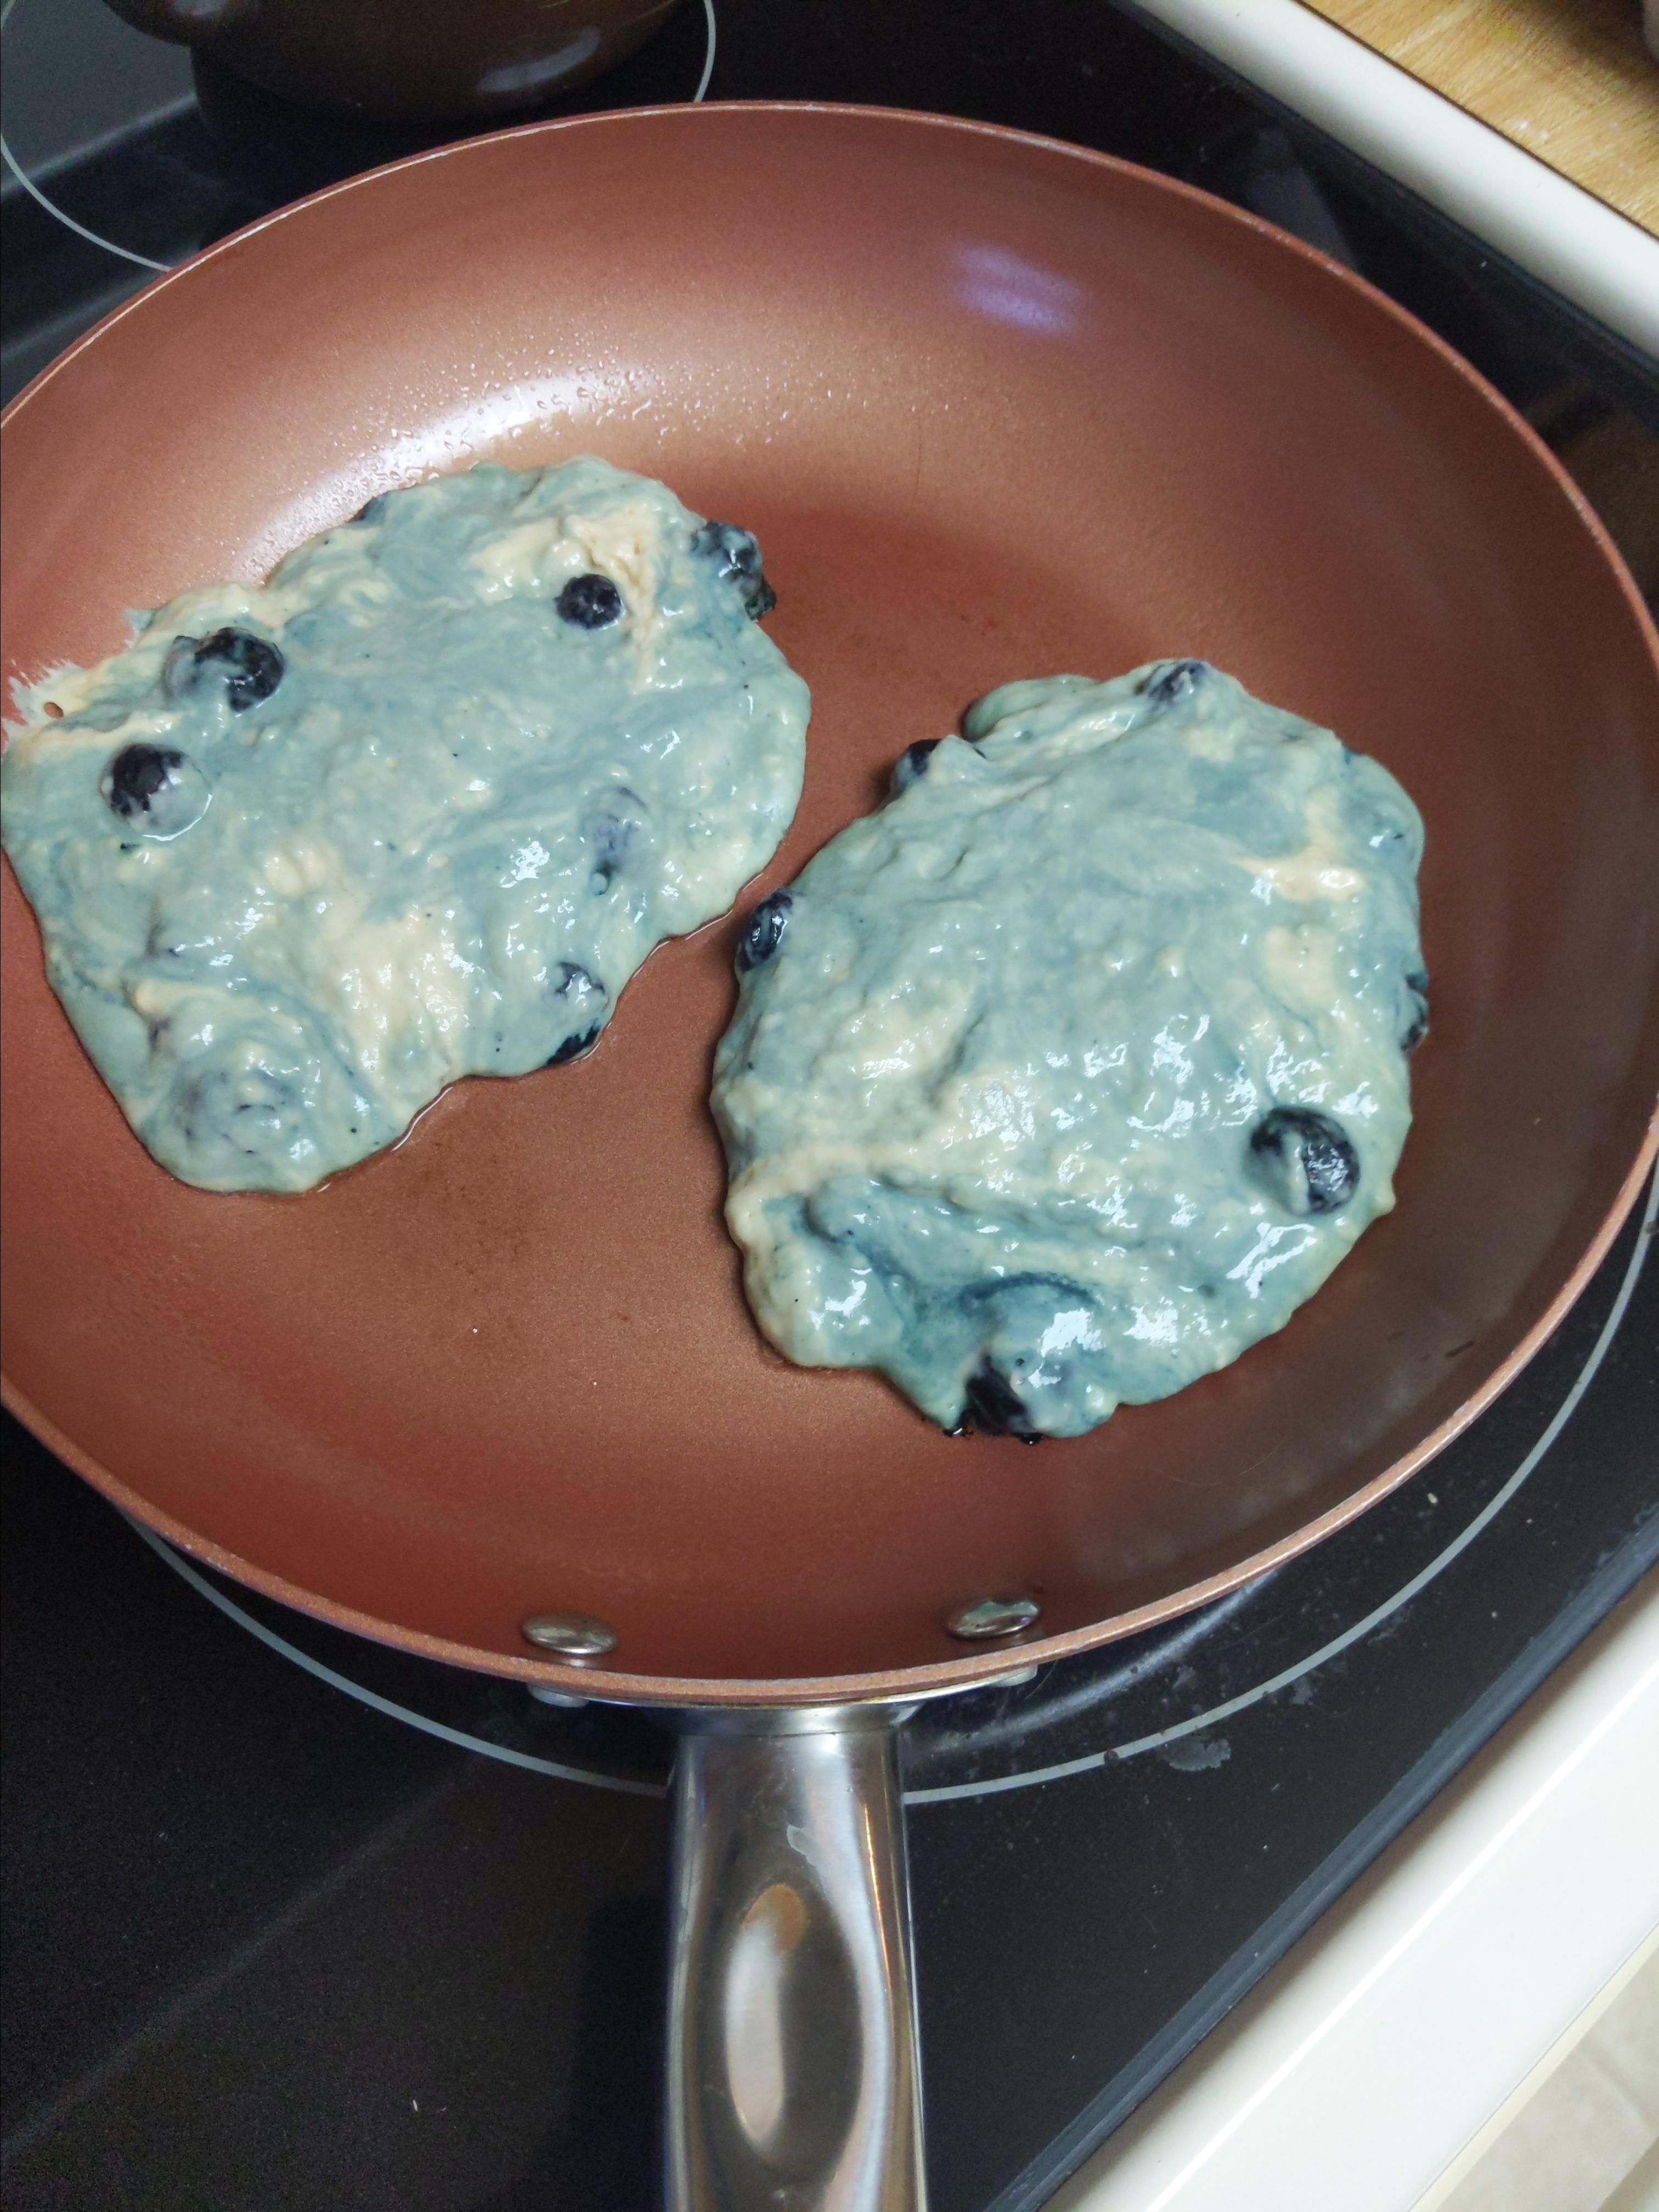 Todd's Famous Blueberry Pancakes 